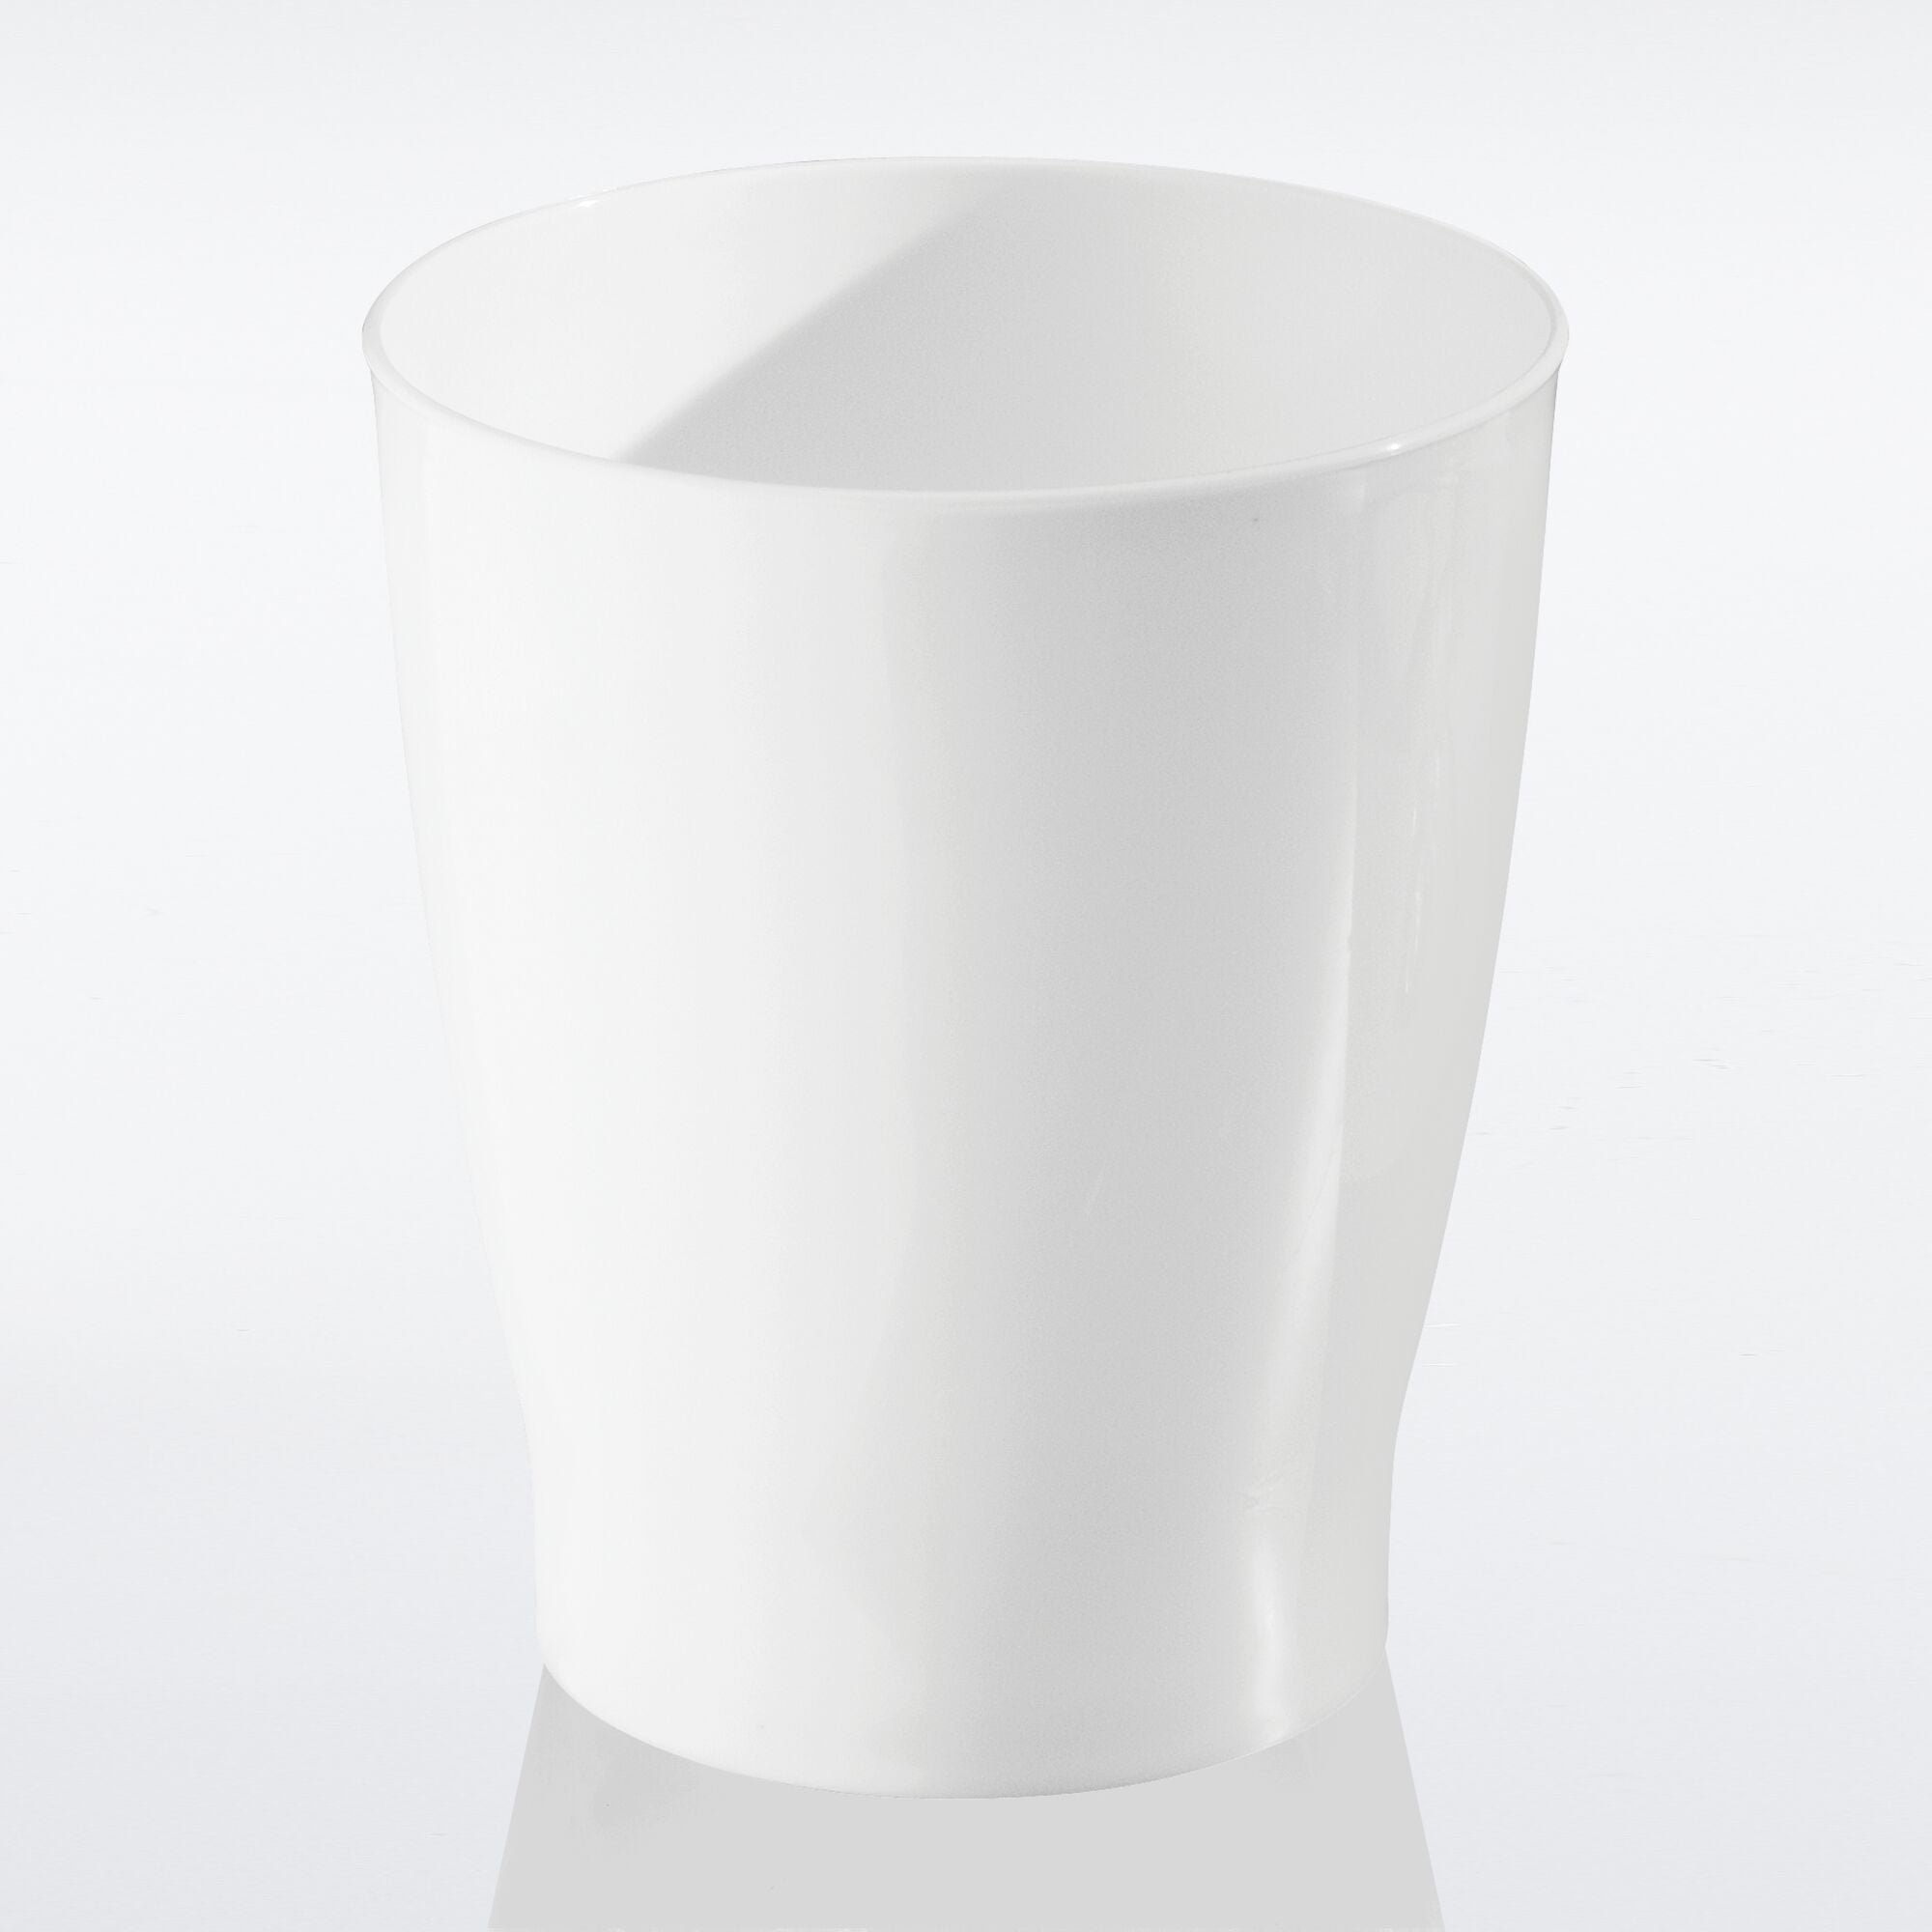 An Ode To A Plastic Urn: How A Small Trash Can Shapes Beauty